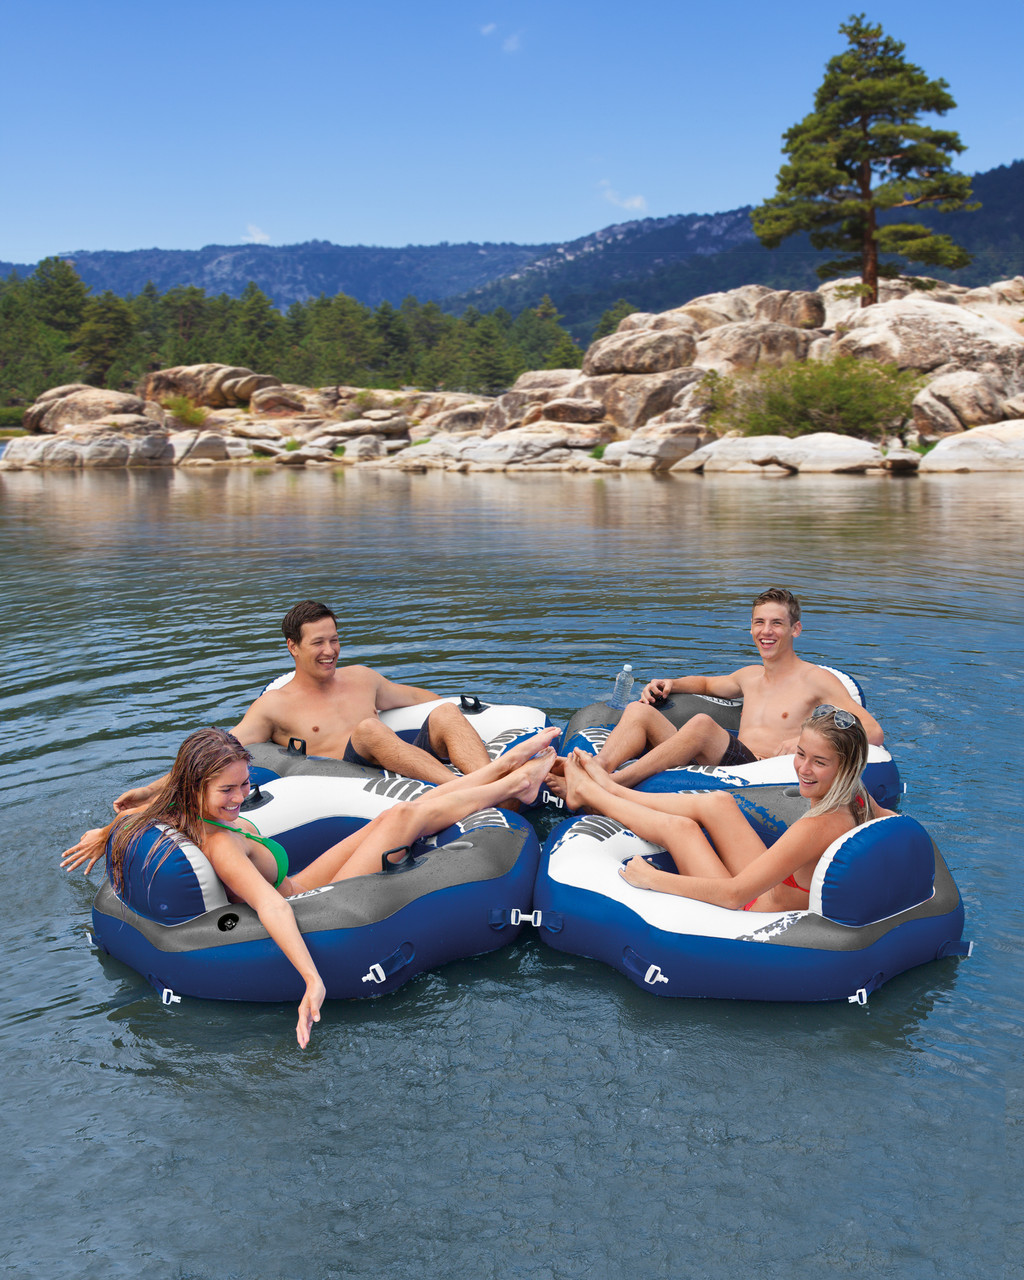 INTEX River Run™ Connect Inflatable Floating Lake Lounge